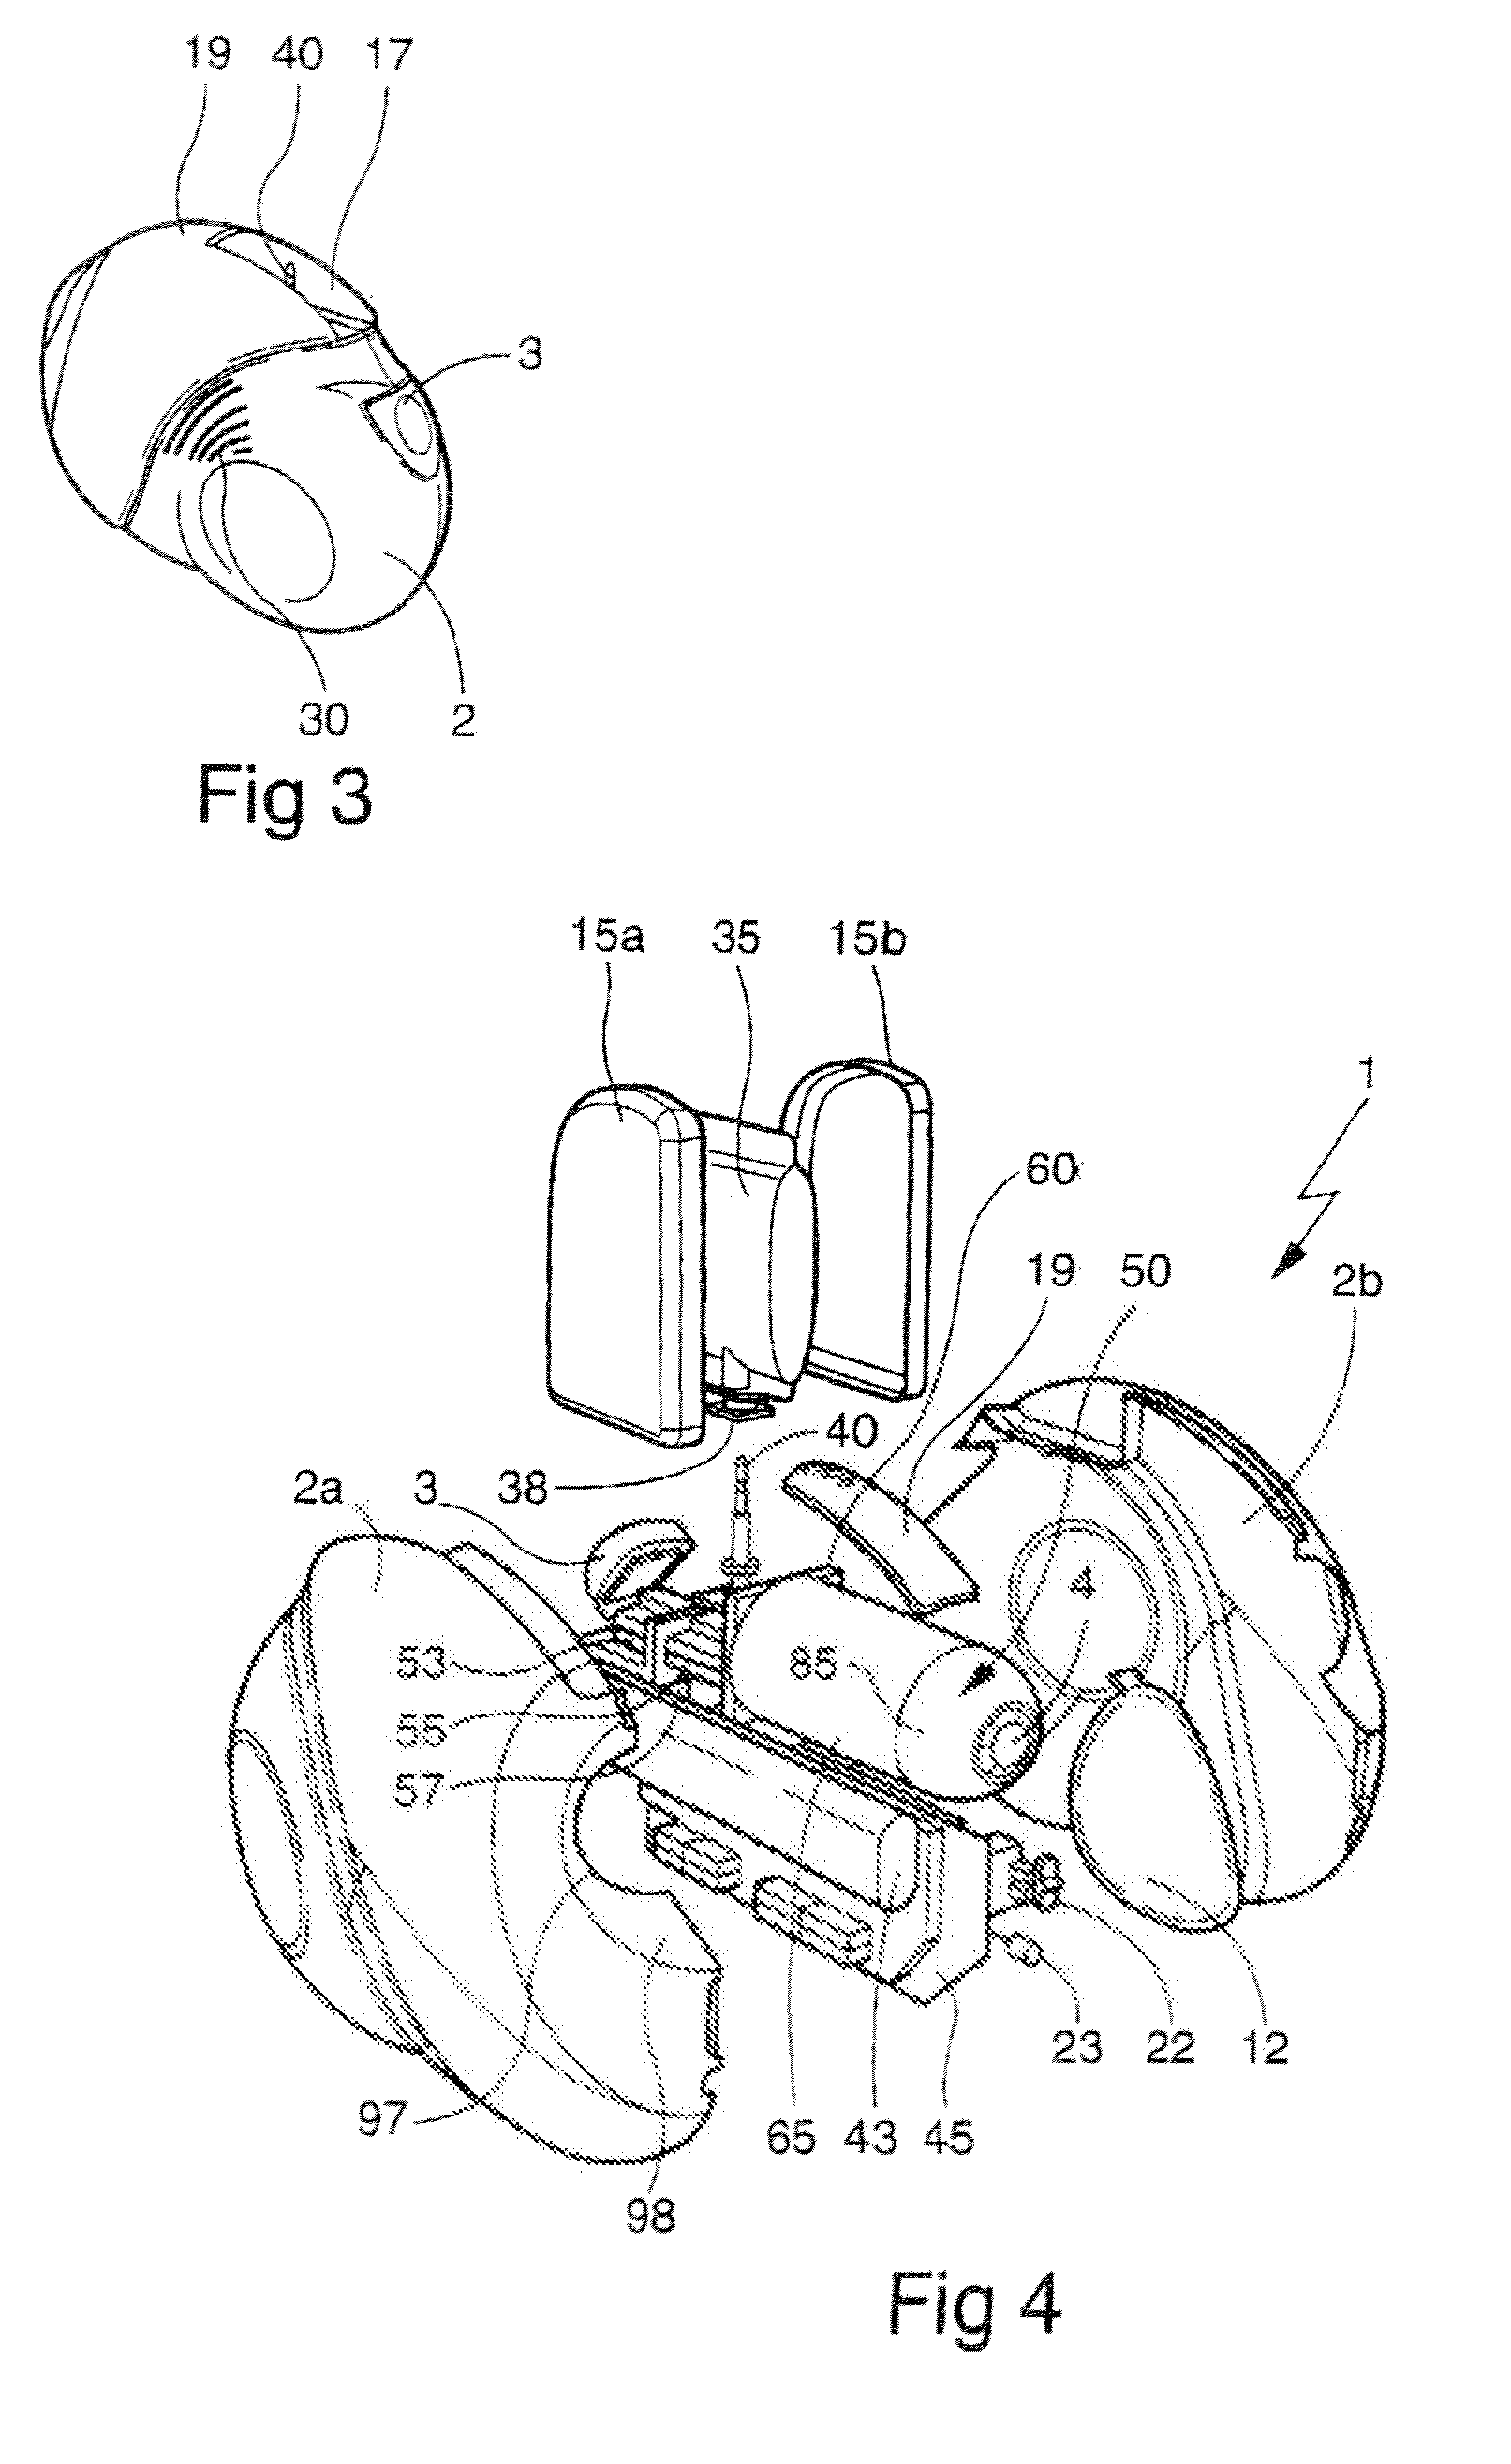 Device for spraying a cosmetic composition while blowing hot or cold air